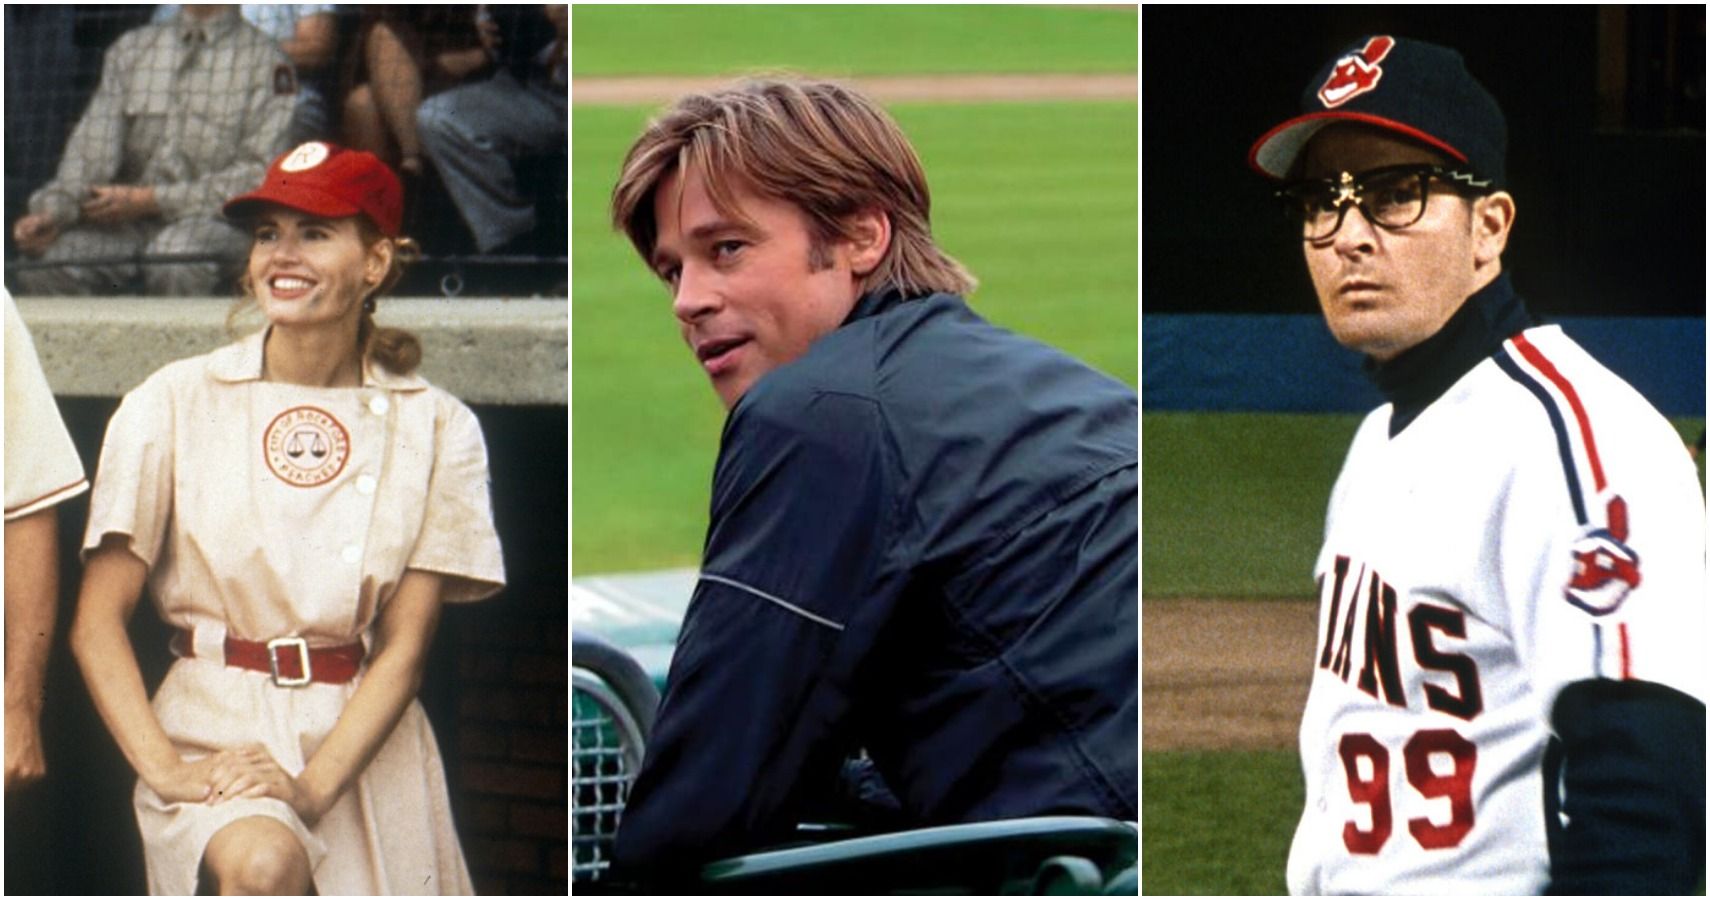 The 10 Best Baseball Movies Ever Made, According to Rotten Tomatoes